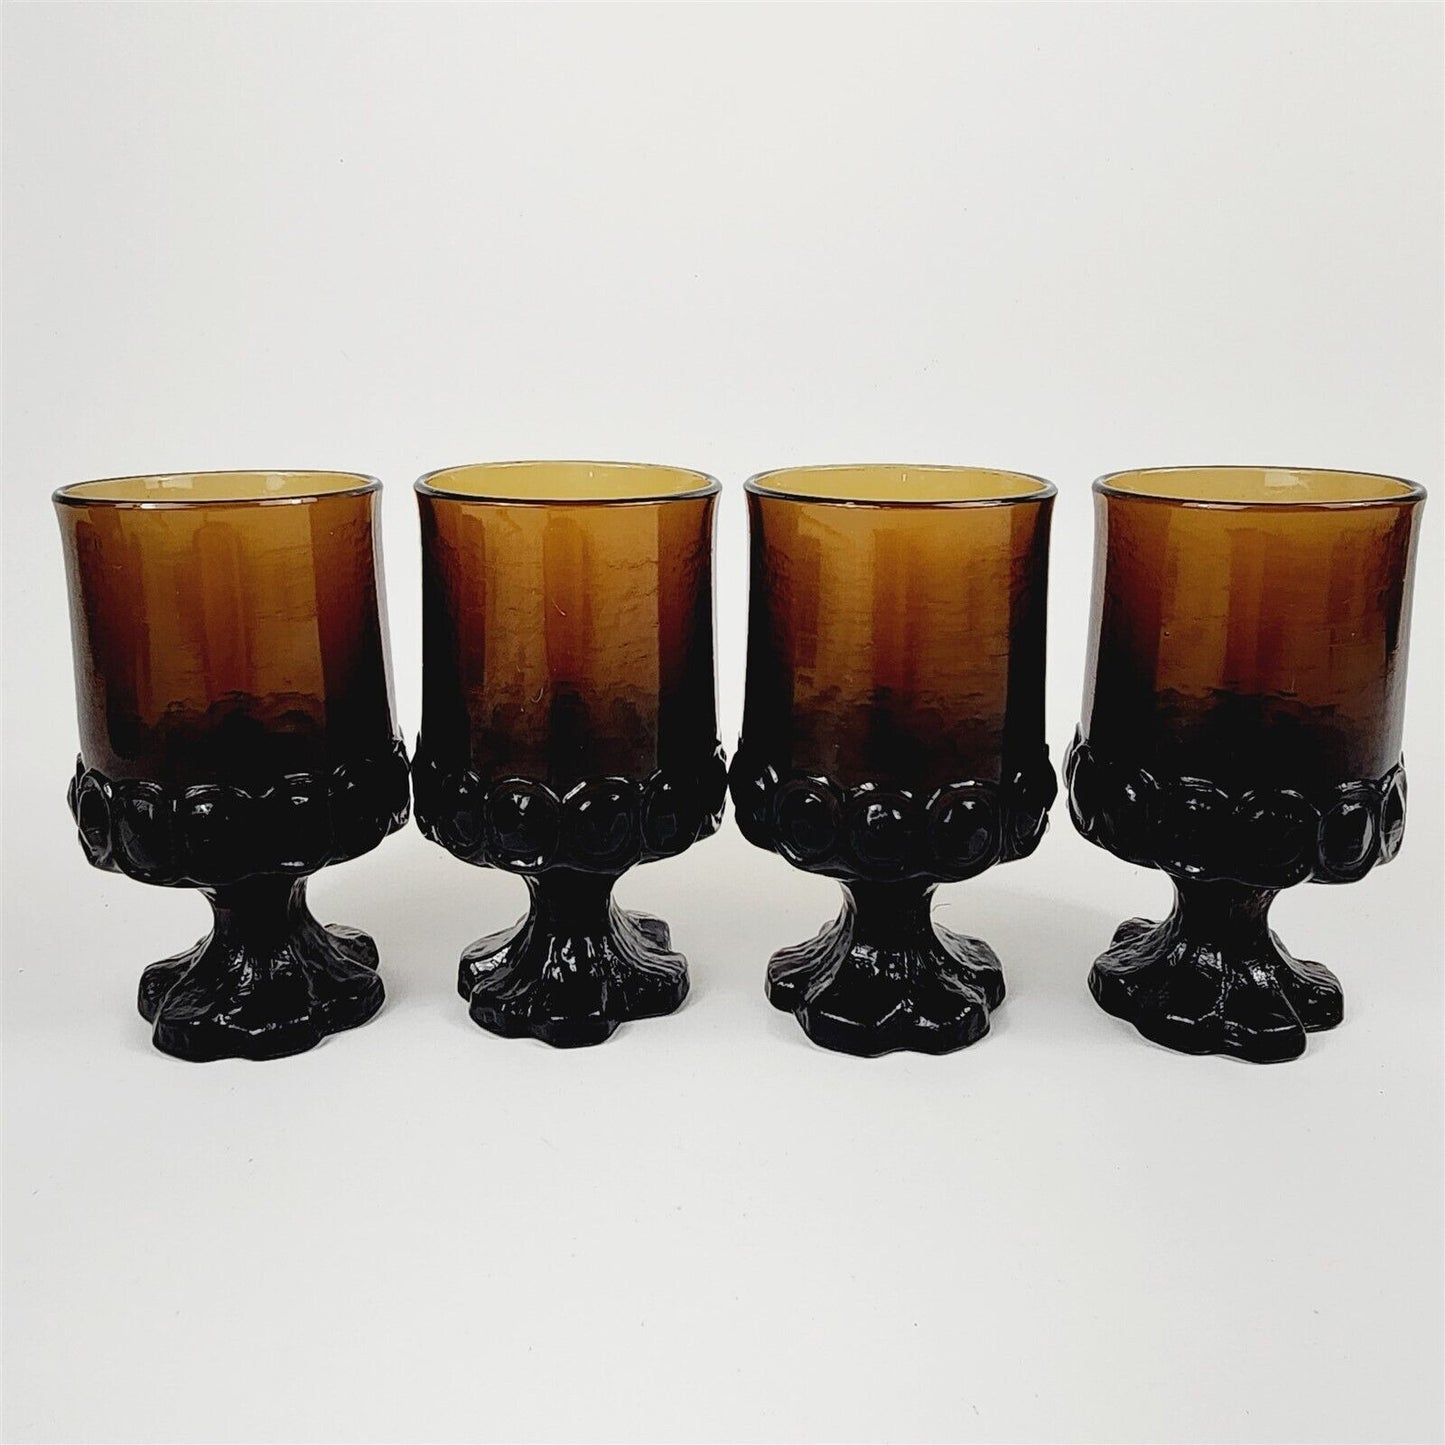 4 Tiffin Franciscan Madeira Glassware Smoke Brown Footed Juice Goblets 4 7/8"